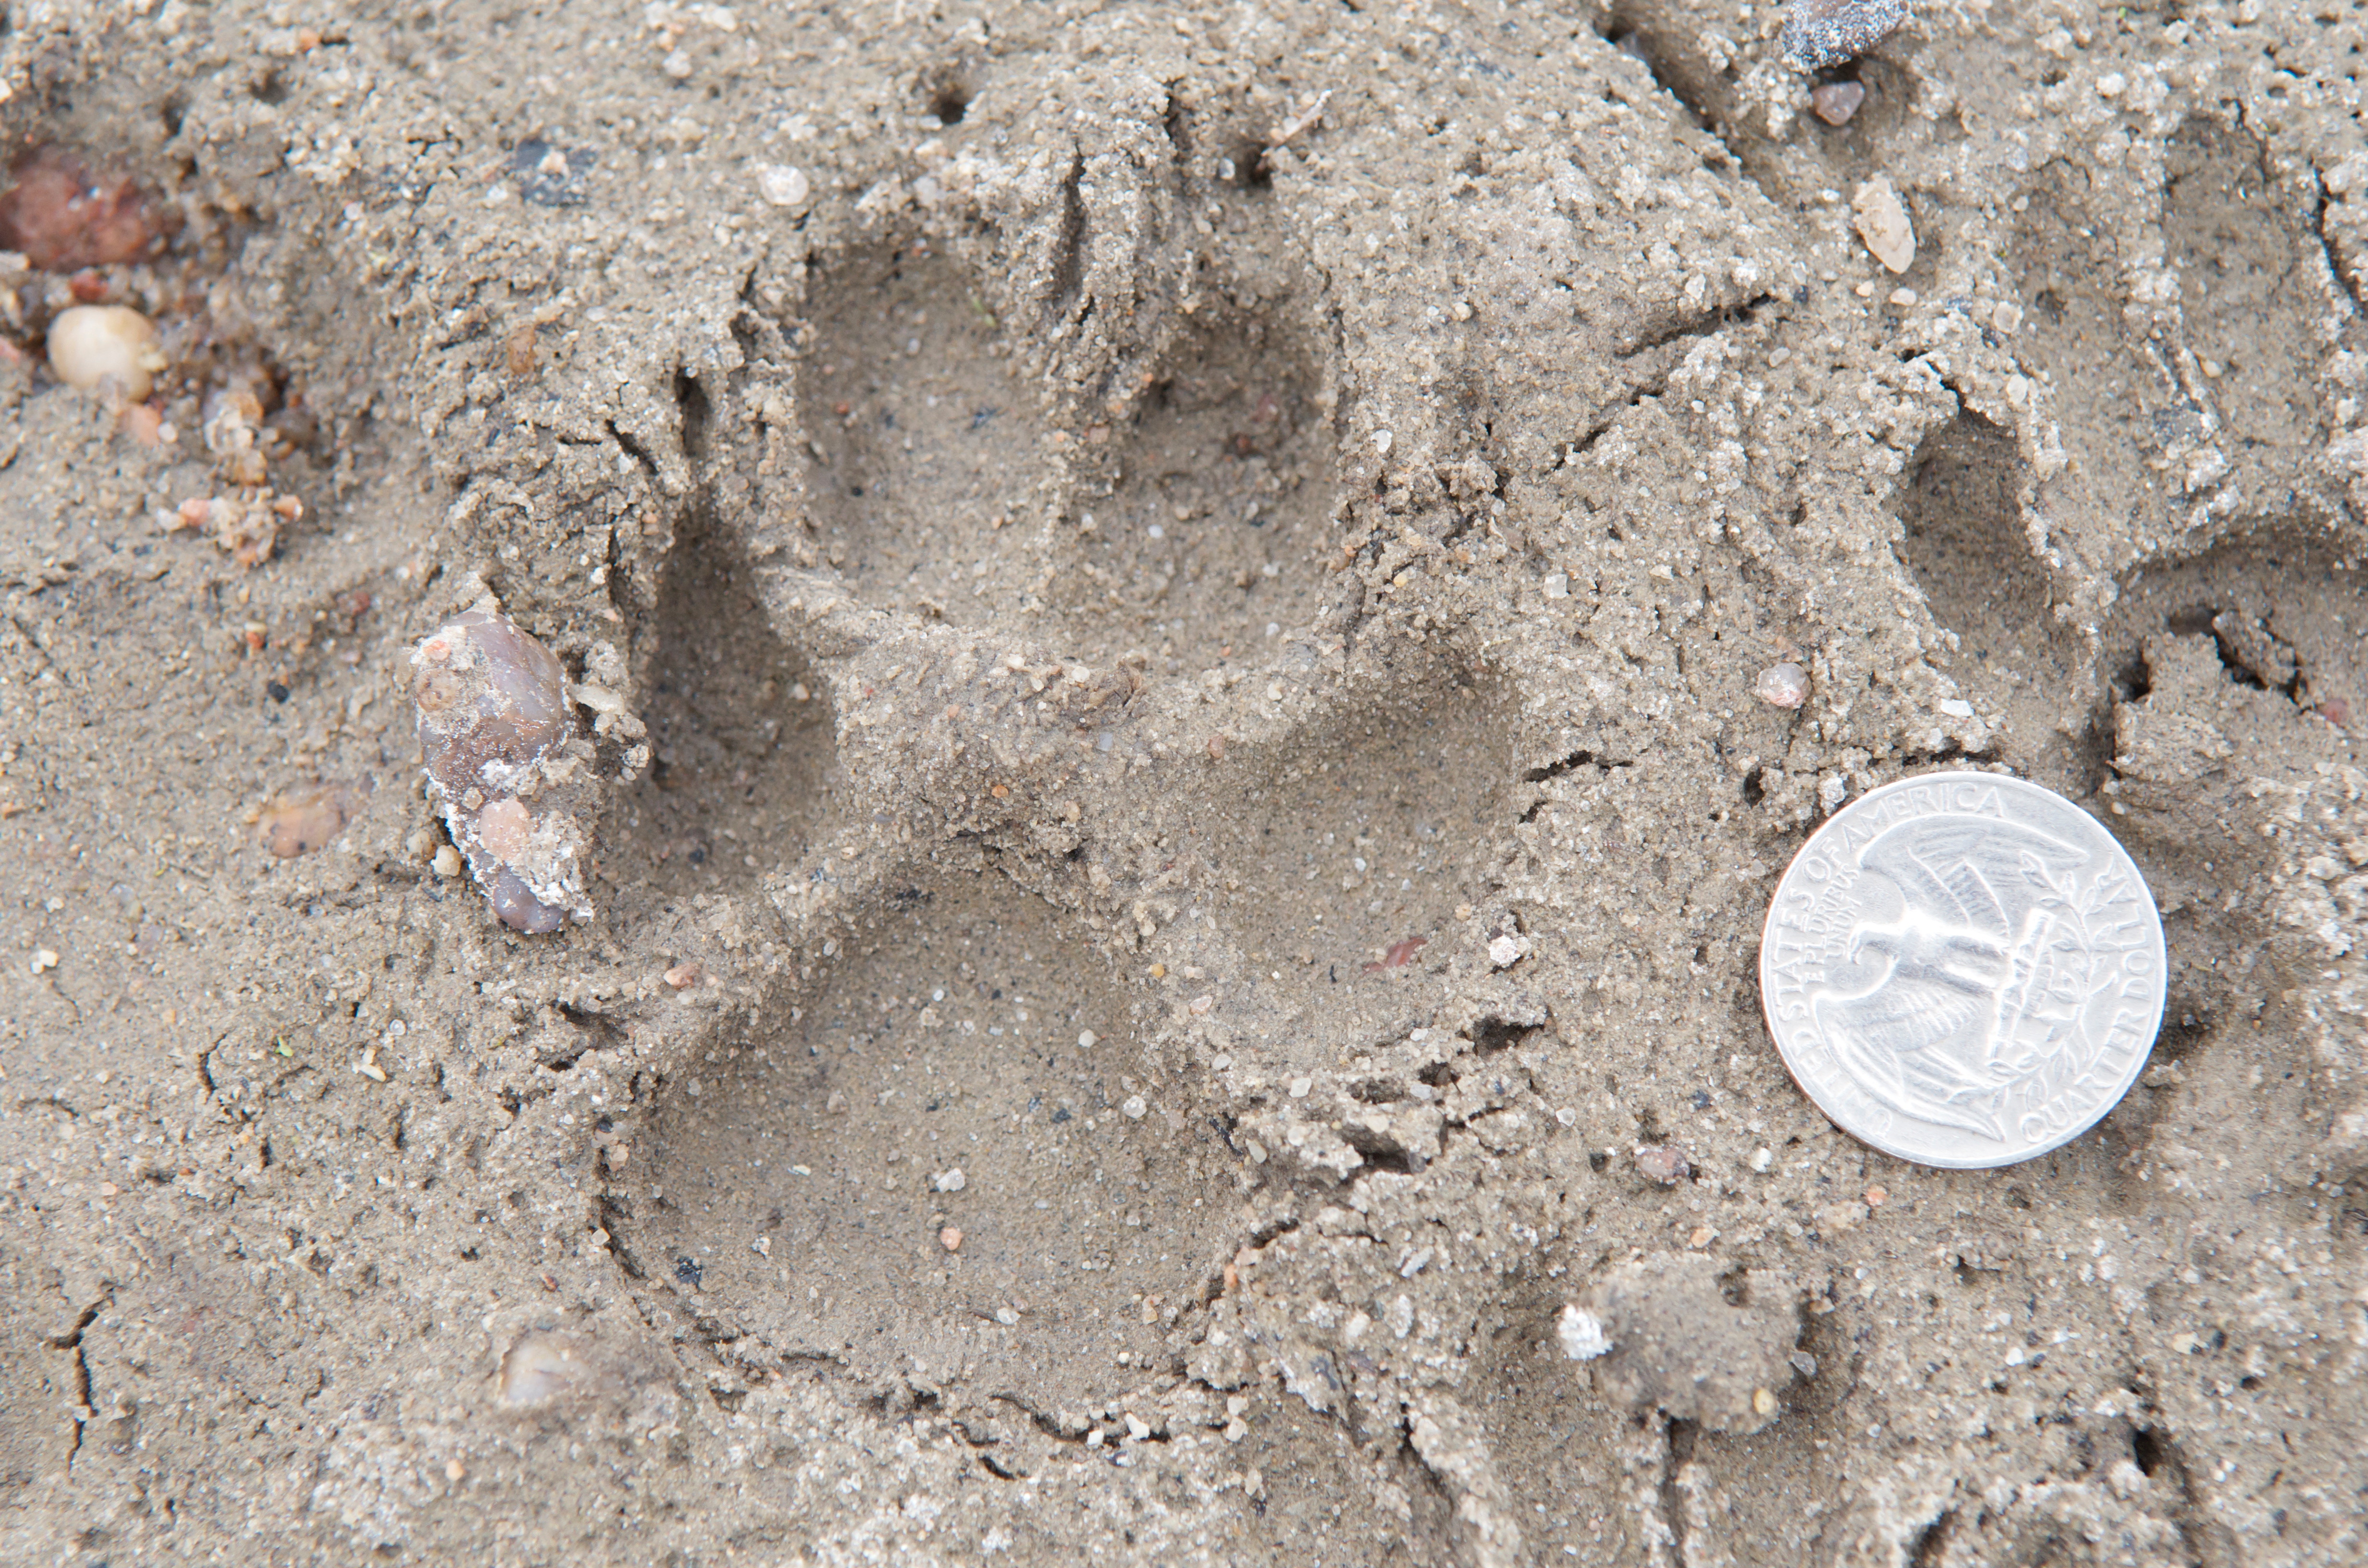 Probably front foot of Coyote (or dog)